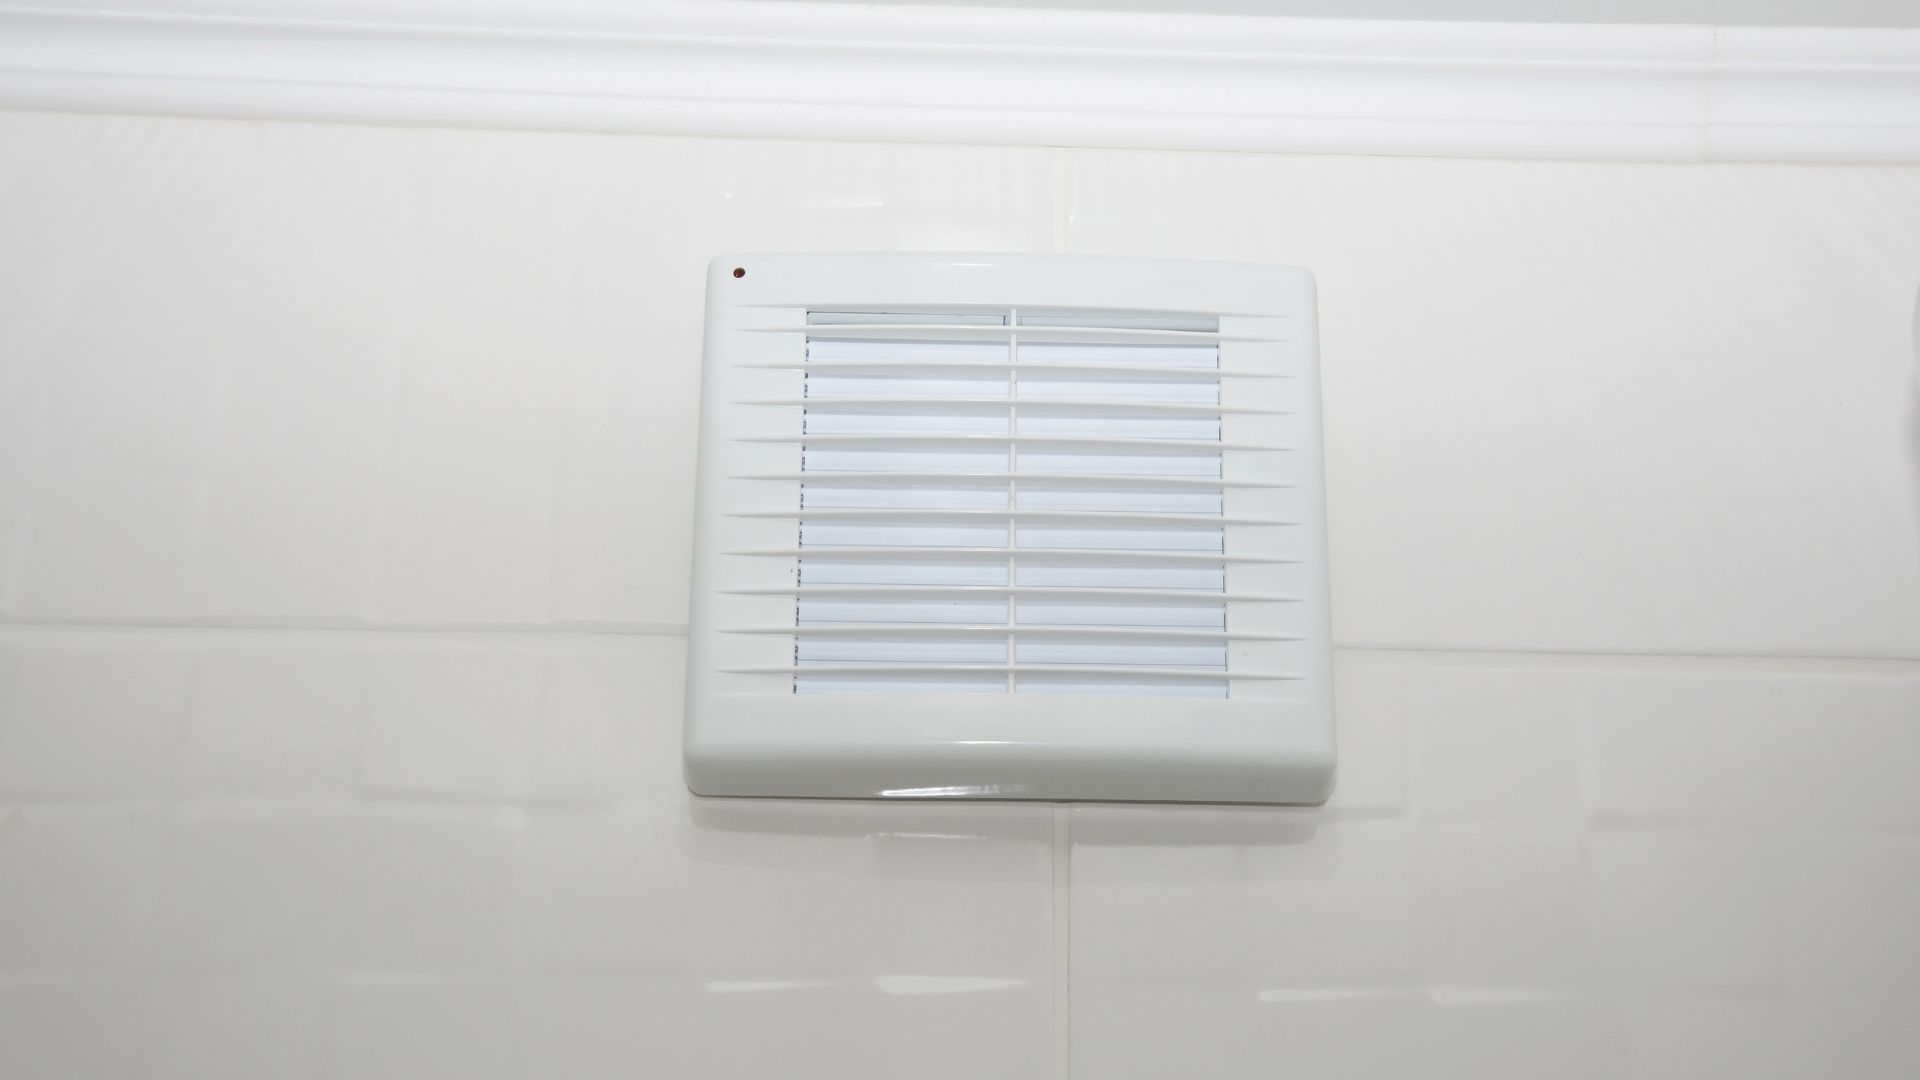 Advantages of Installing Exhaust Fans: Electrical Services for Improved Ventilation